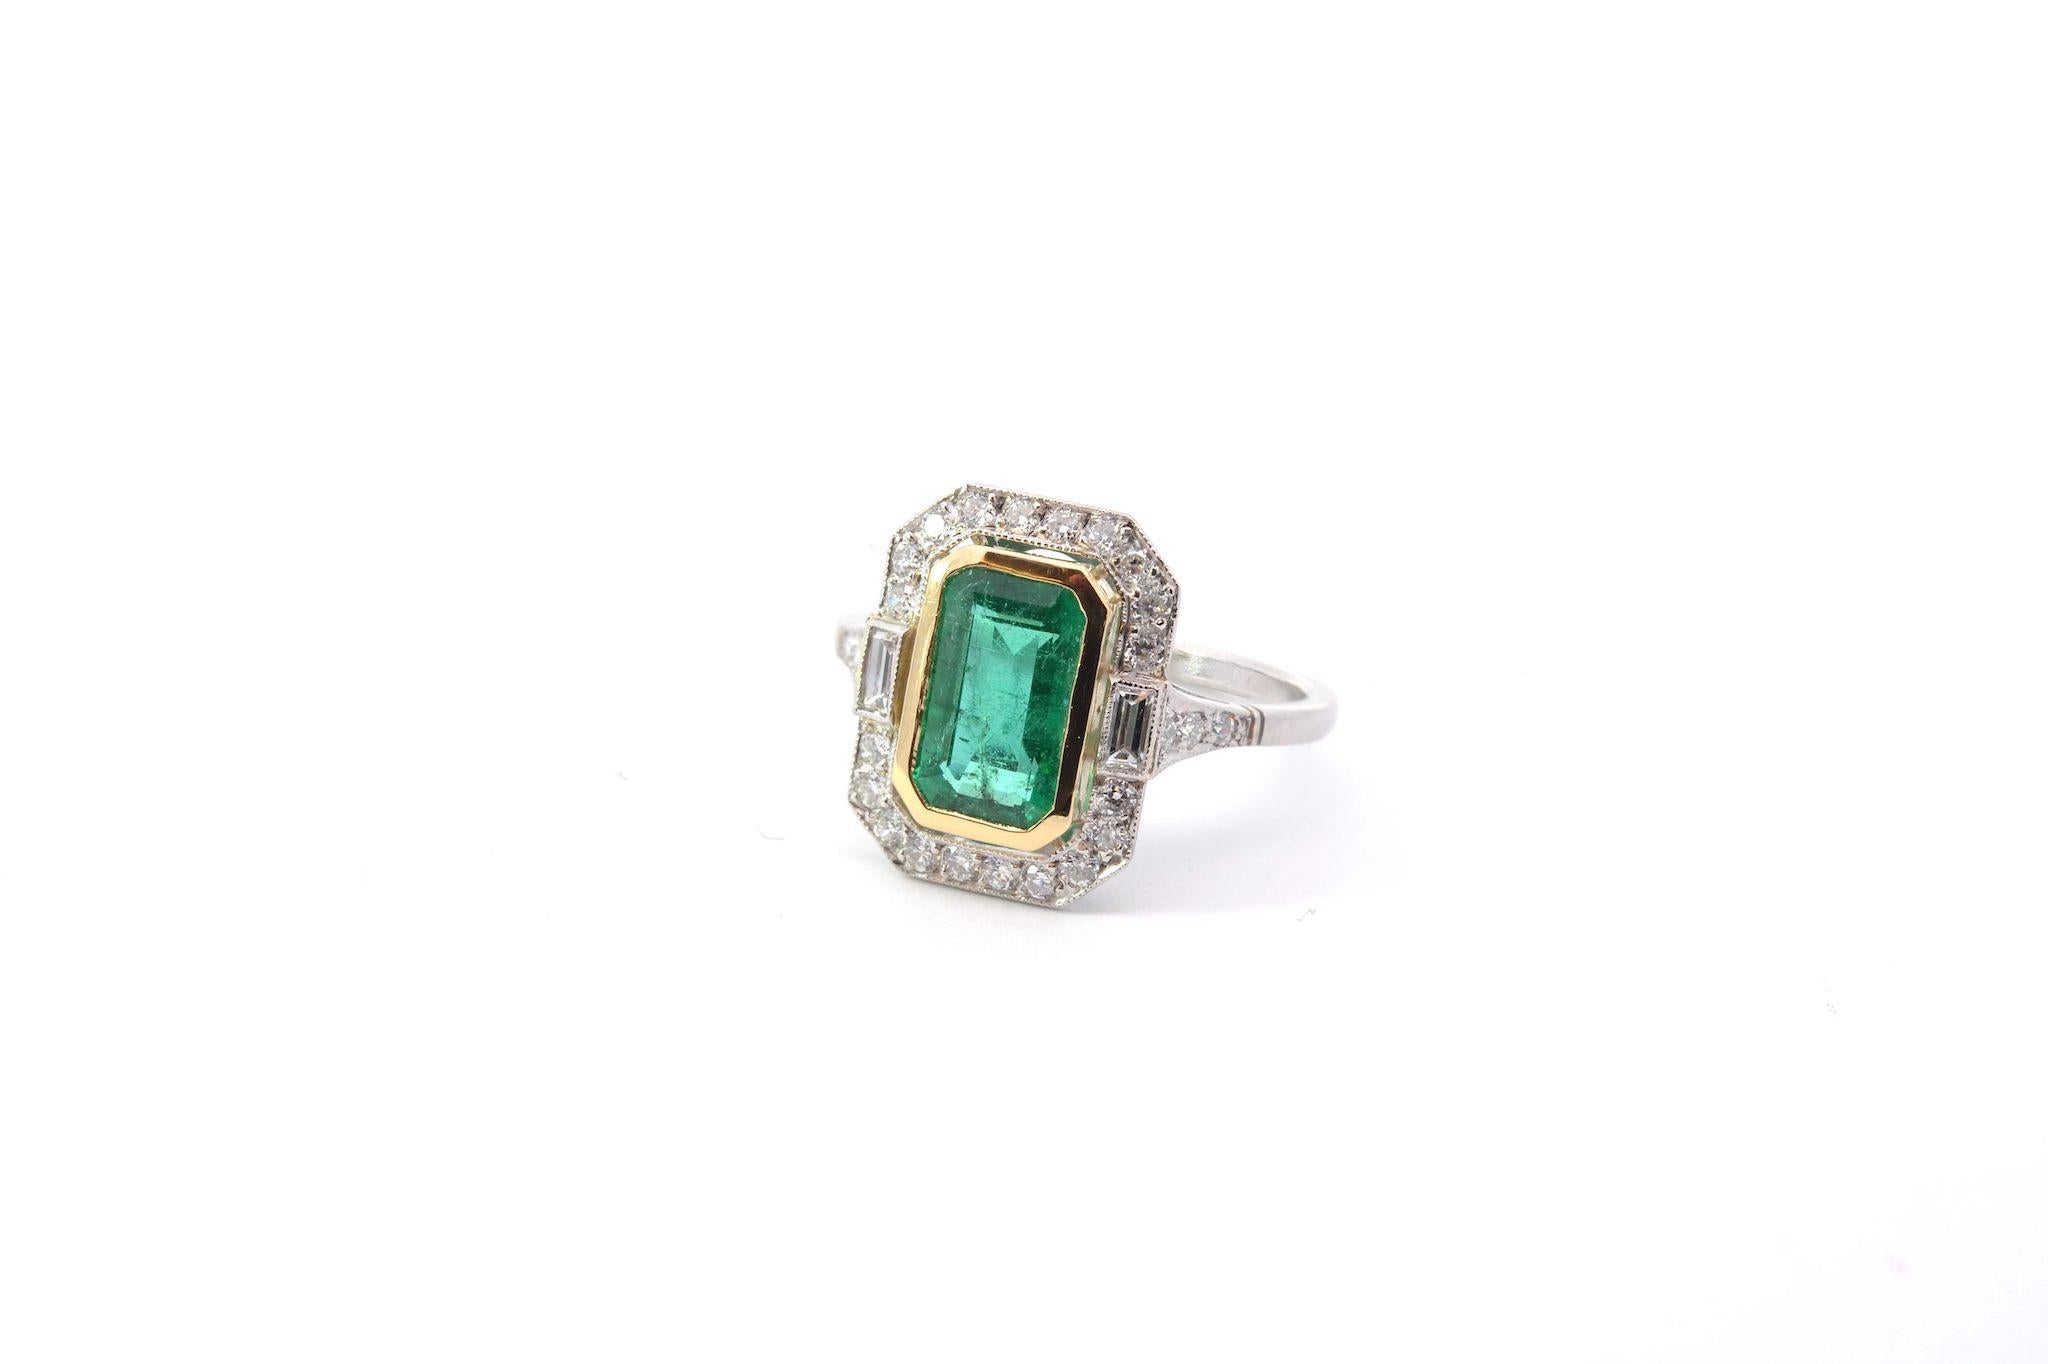 Emerald Cut 1, 79 carats emerald and diamonds ring in platinum and 18k gold For Sale